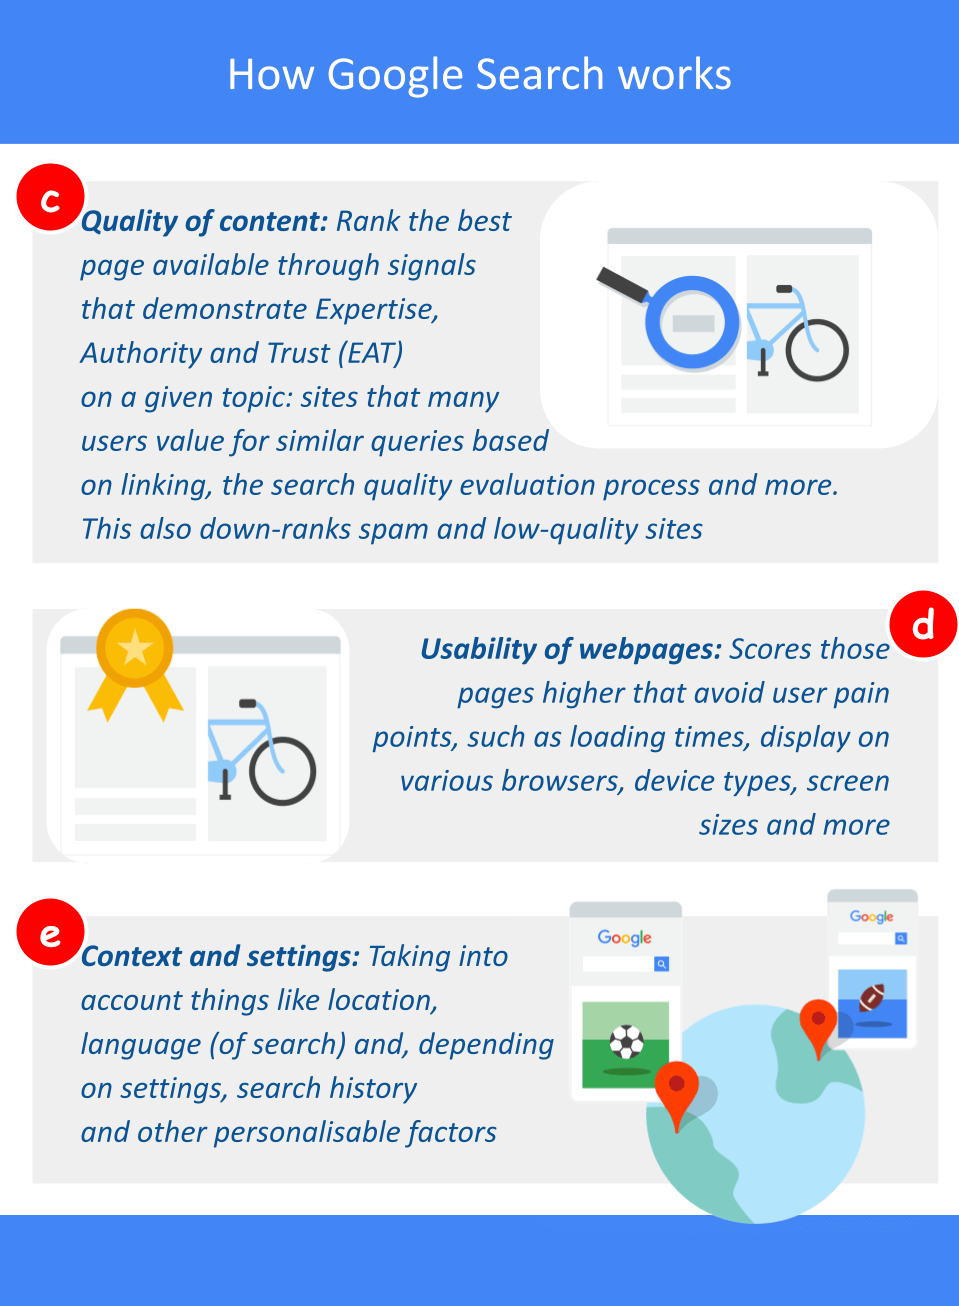 how-Google-Search-works-03.png